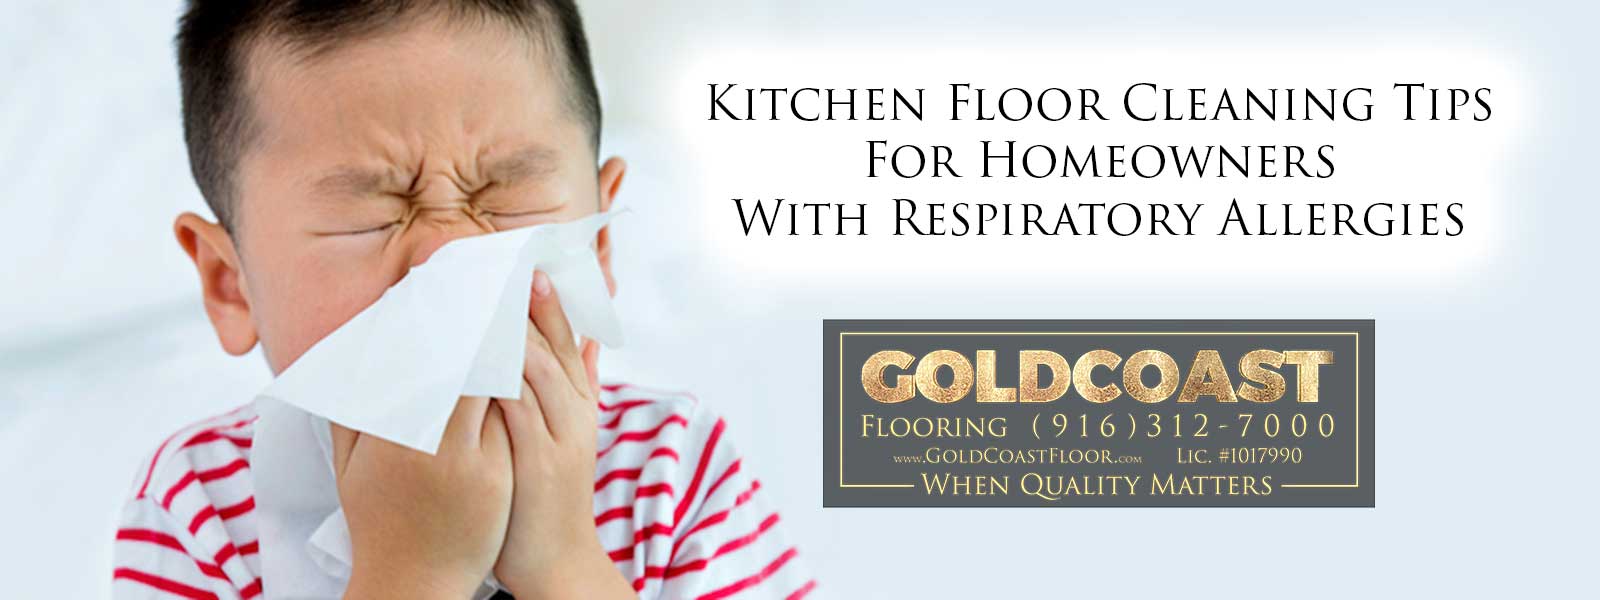 Kitchen-Floor-Cleaning-Tips-For-Homeowners-With-Respiratory-Allergies